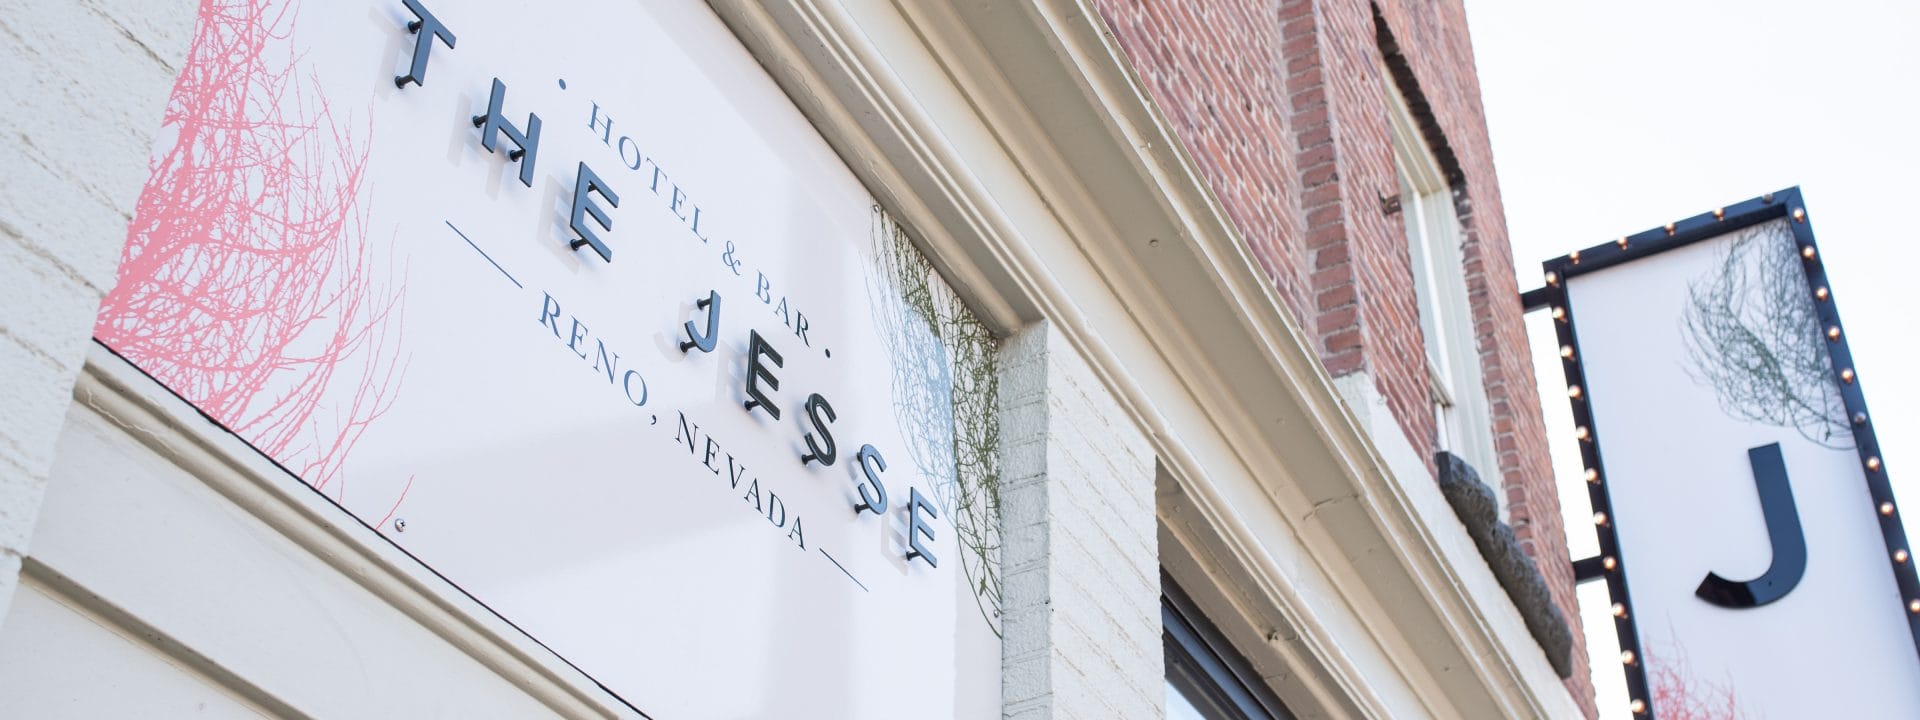 The Jesse Hotel and Bar Exterior - Signage